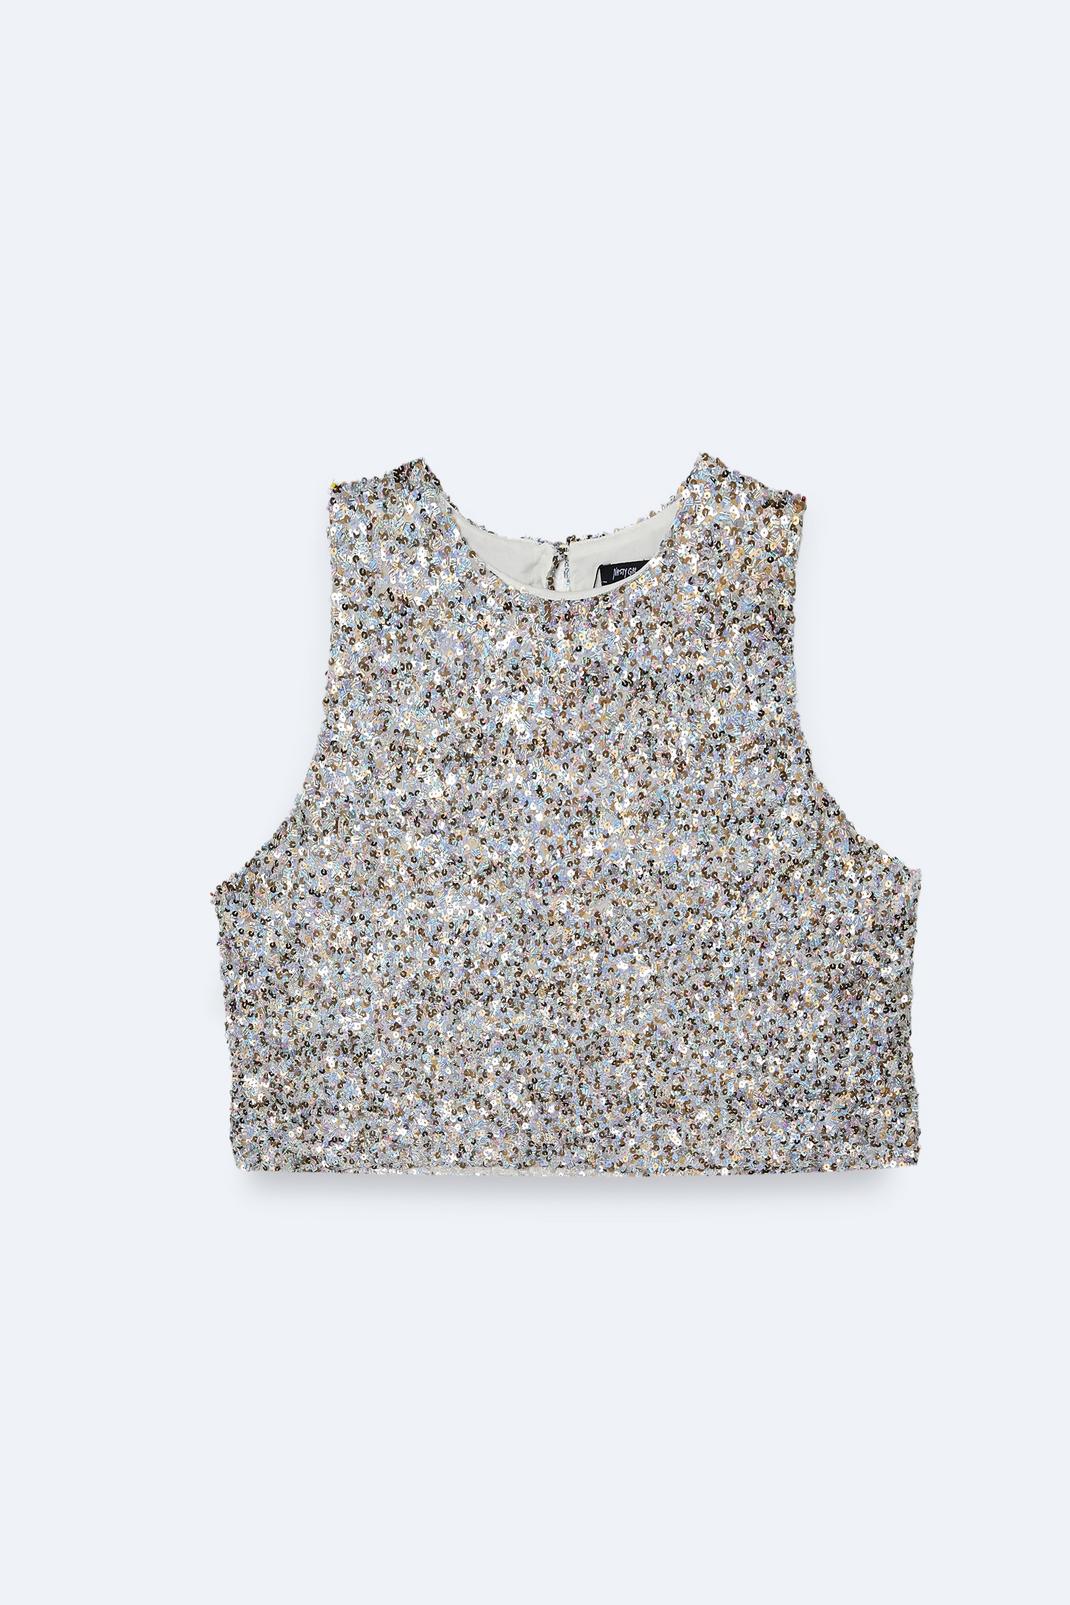 Plus Size Sequined Tops For Women